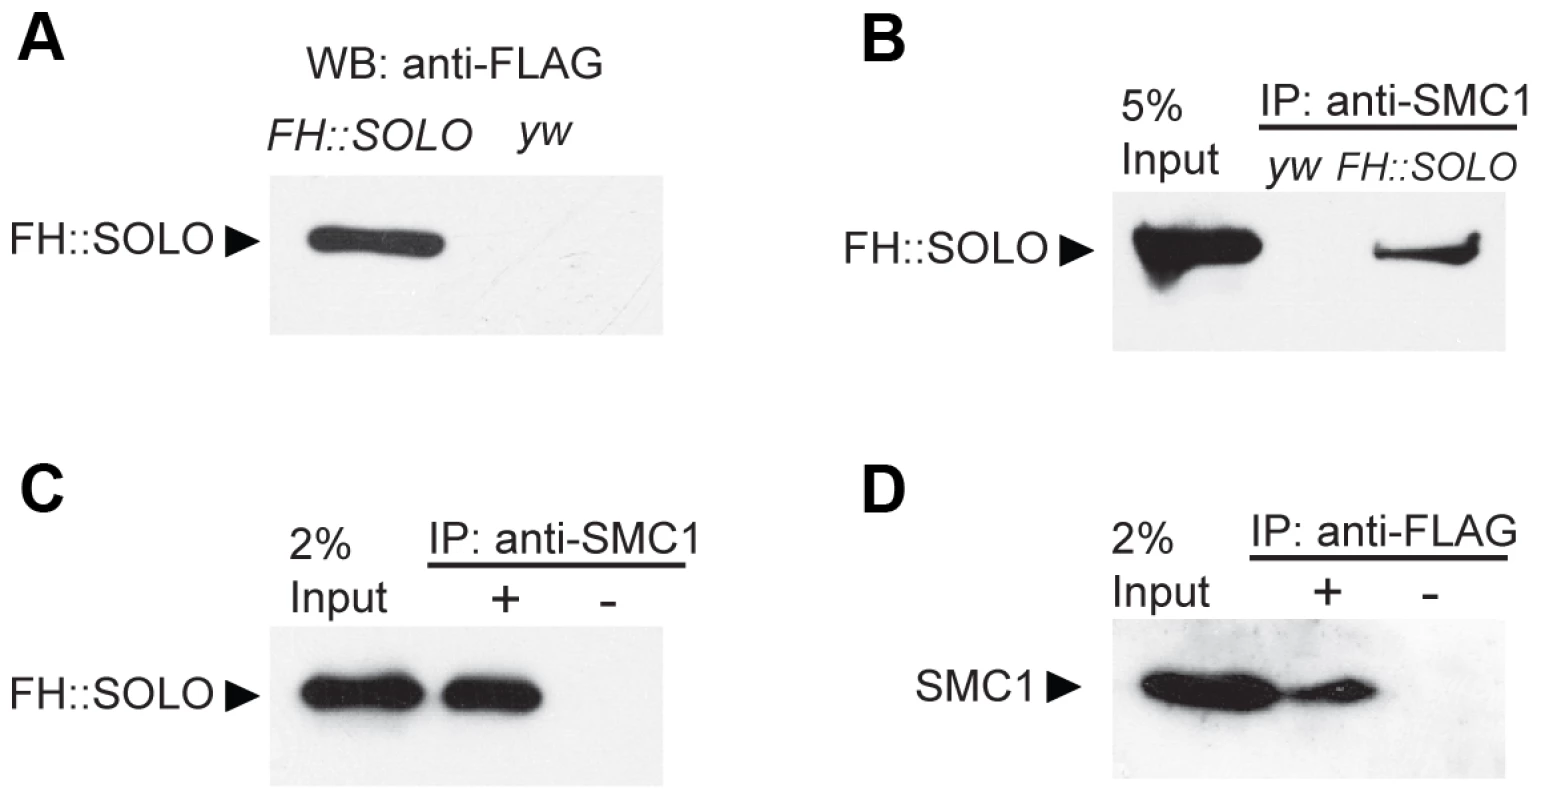 Co-immunoprecipitation of SOLO and SMC1 from ovarian extracts.